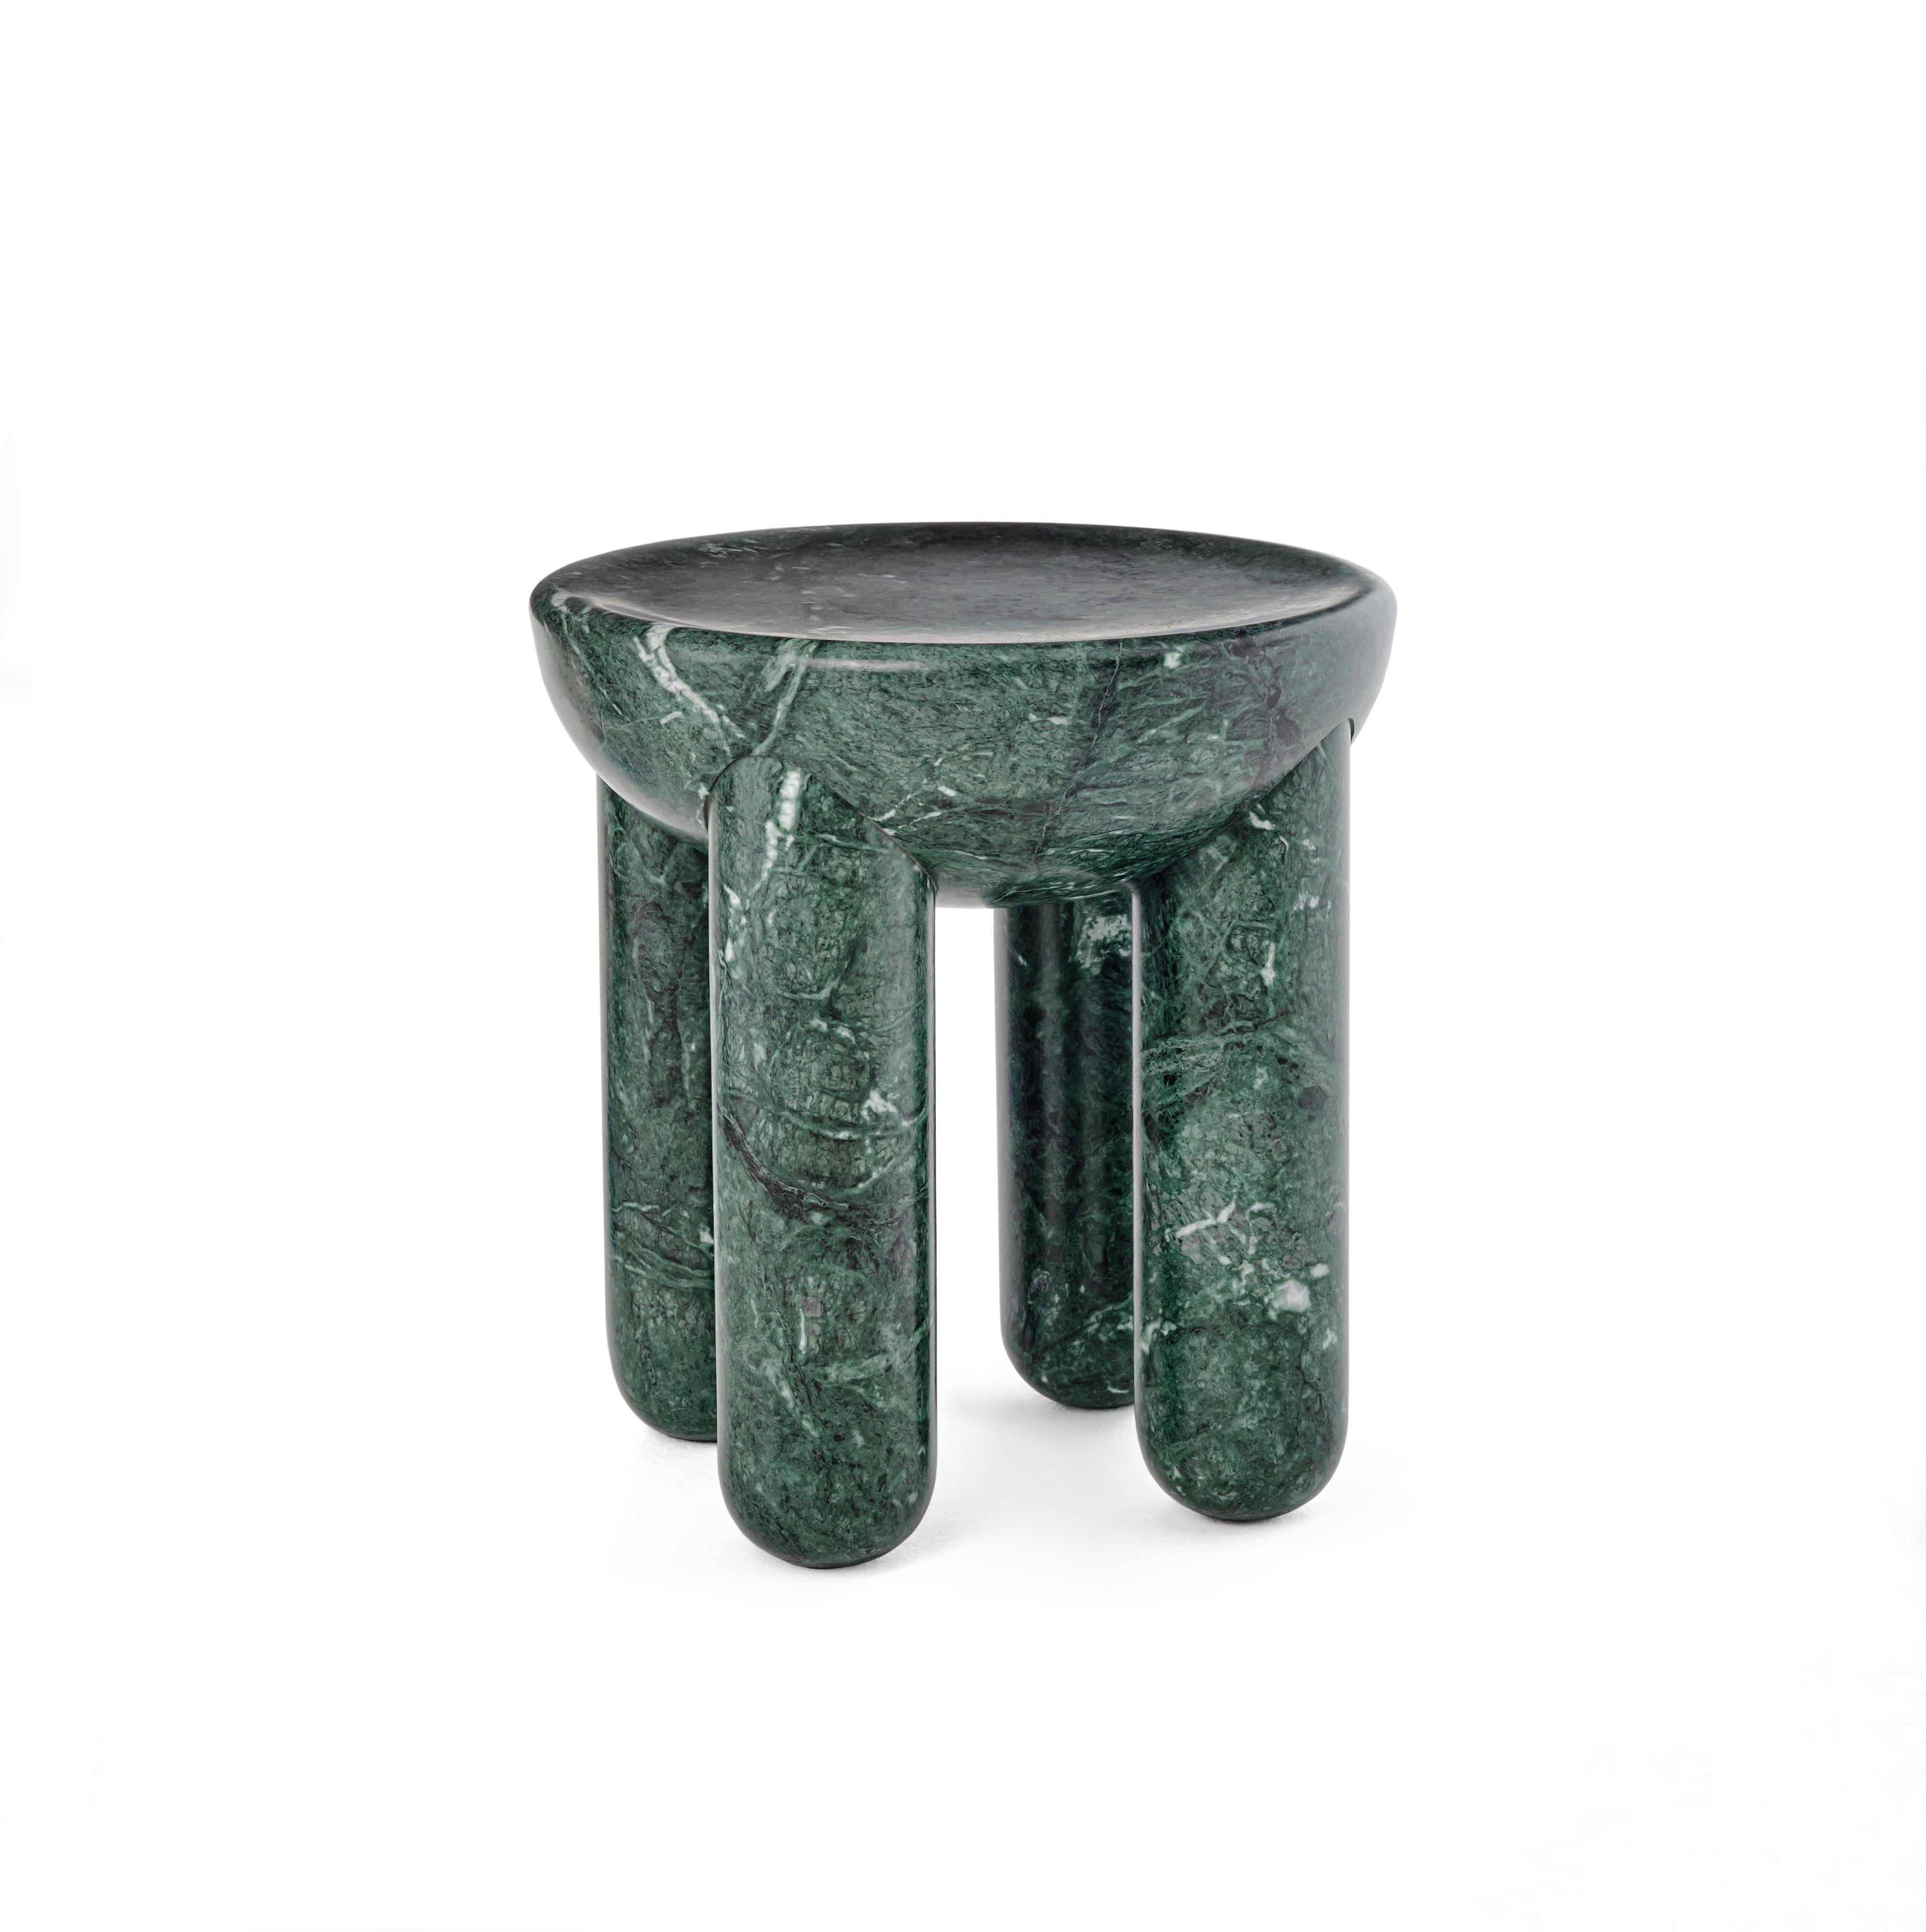 Ukrainian Contemporary Coffee or Side Table 'Freyja 3' by Noom, Green Marble For Sale